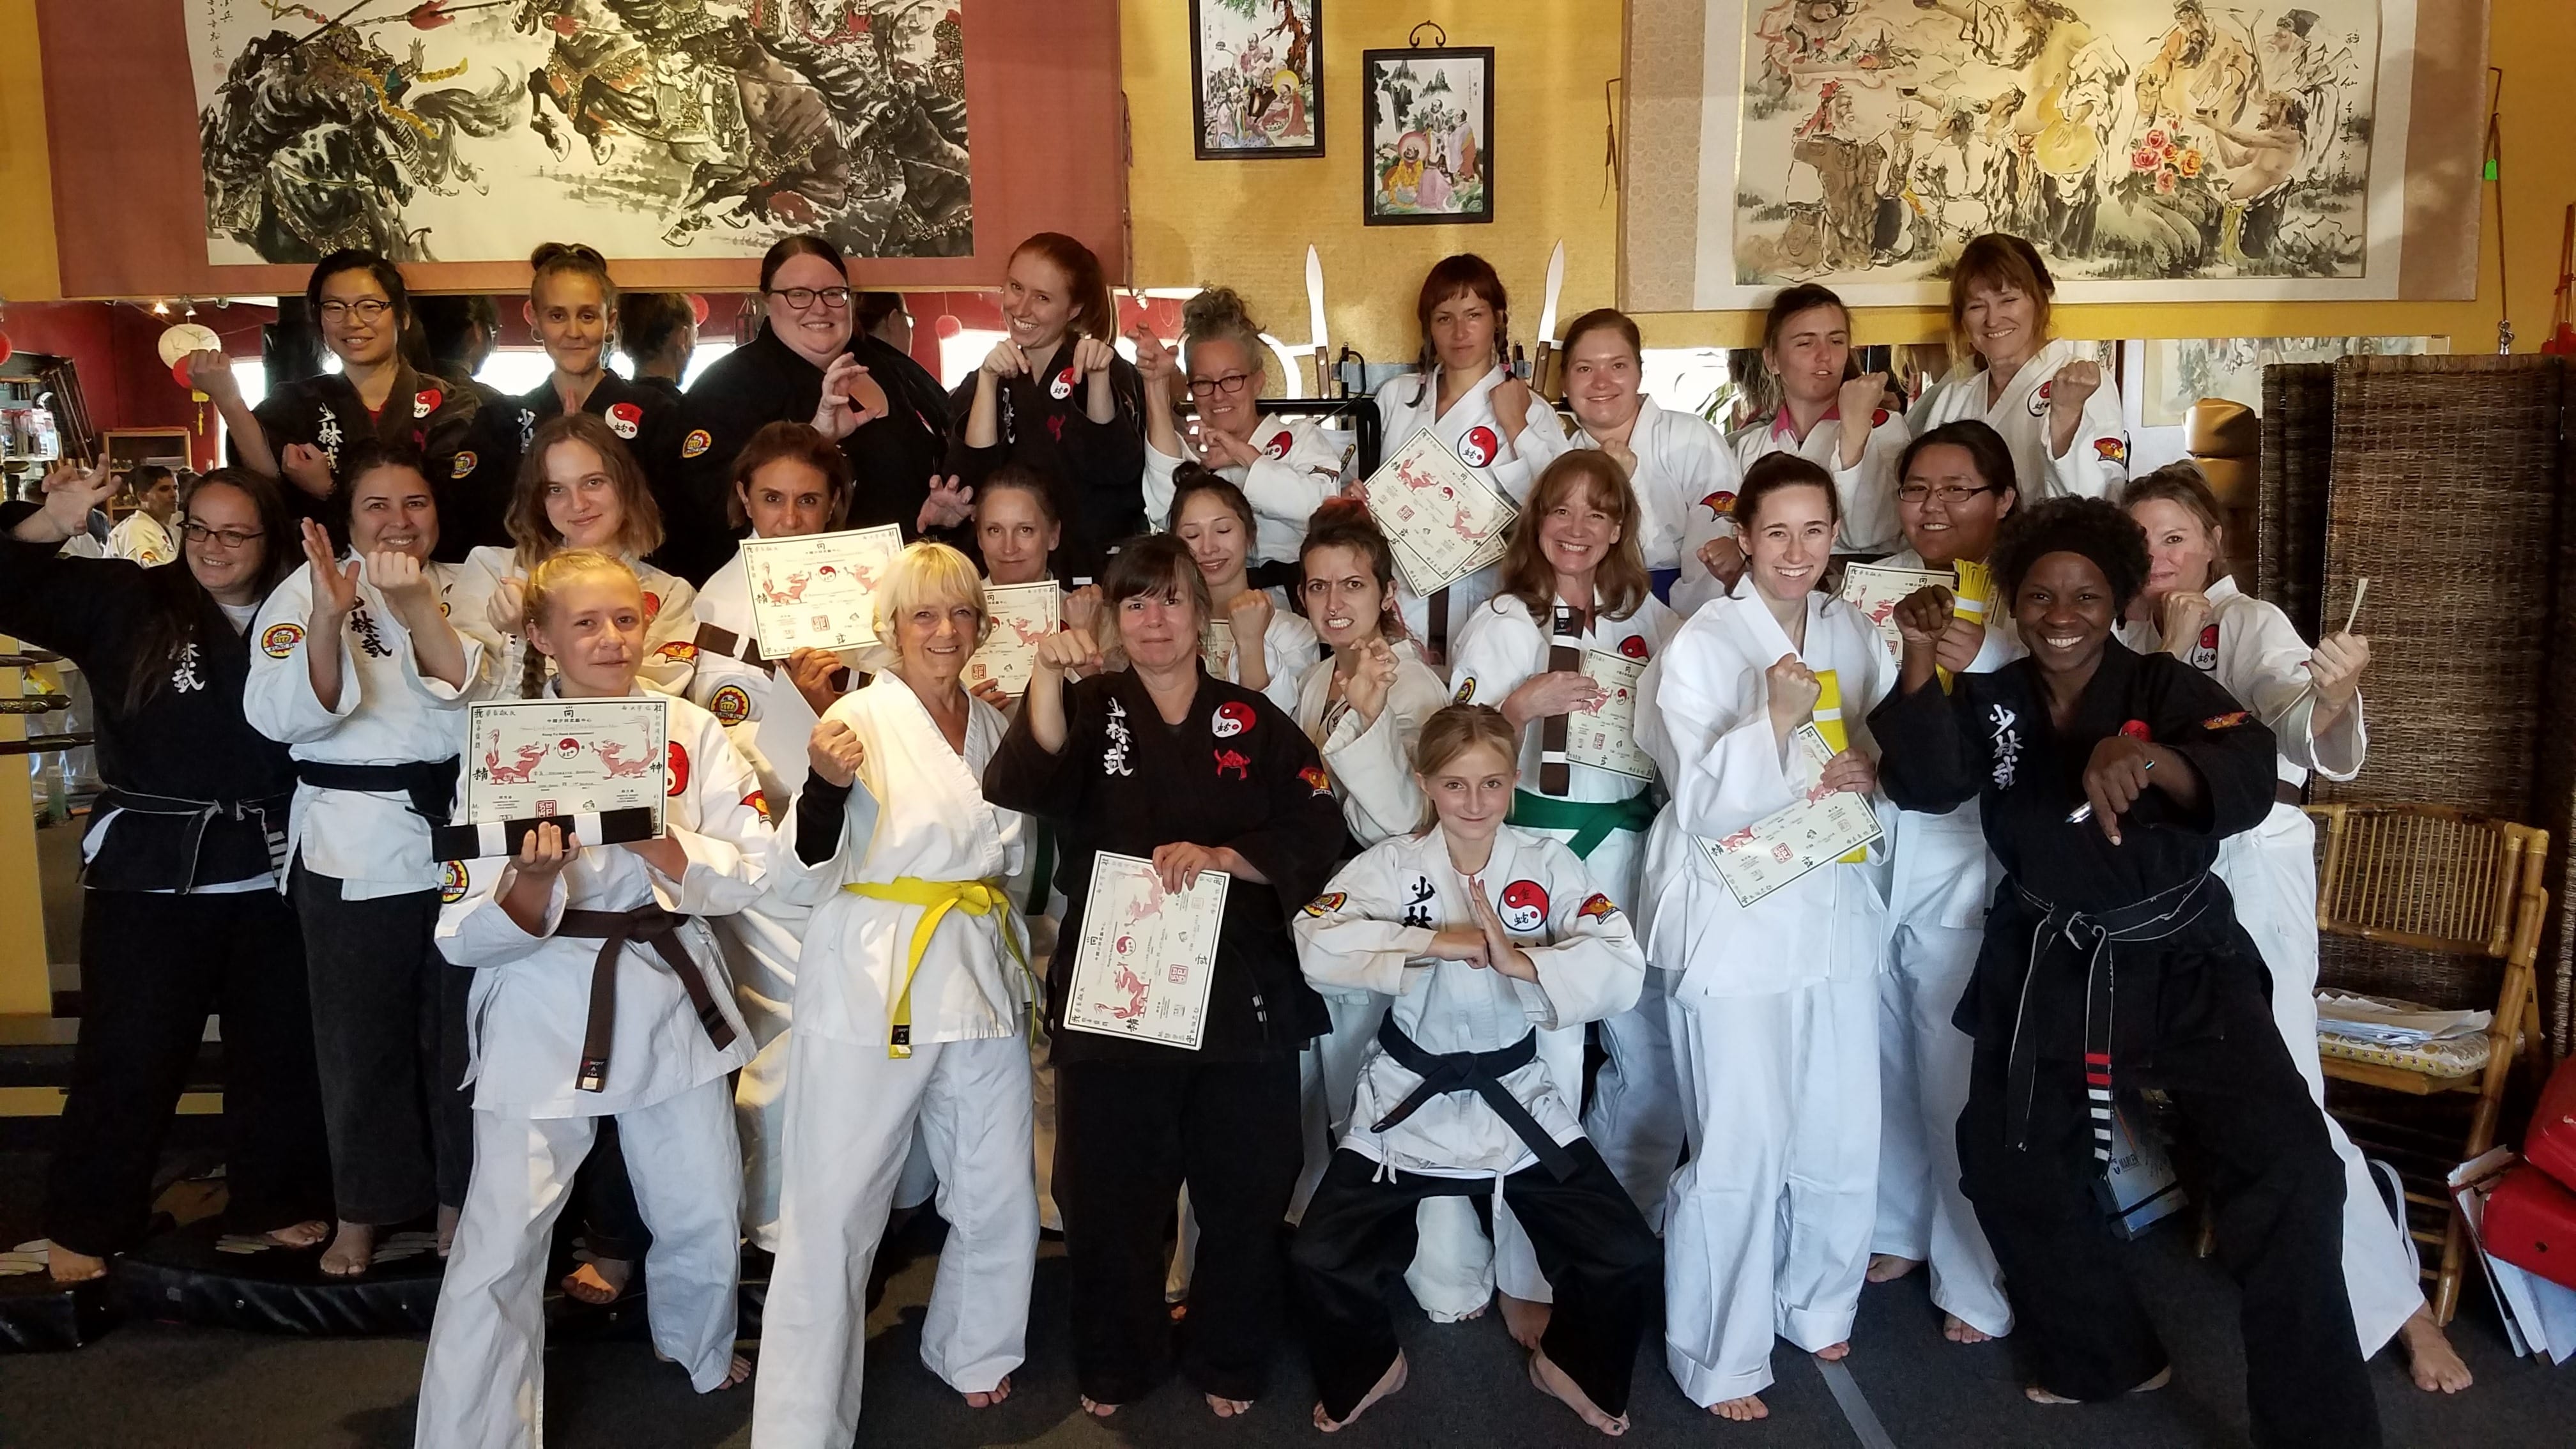 Ladies of shaolin display advancement certificates